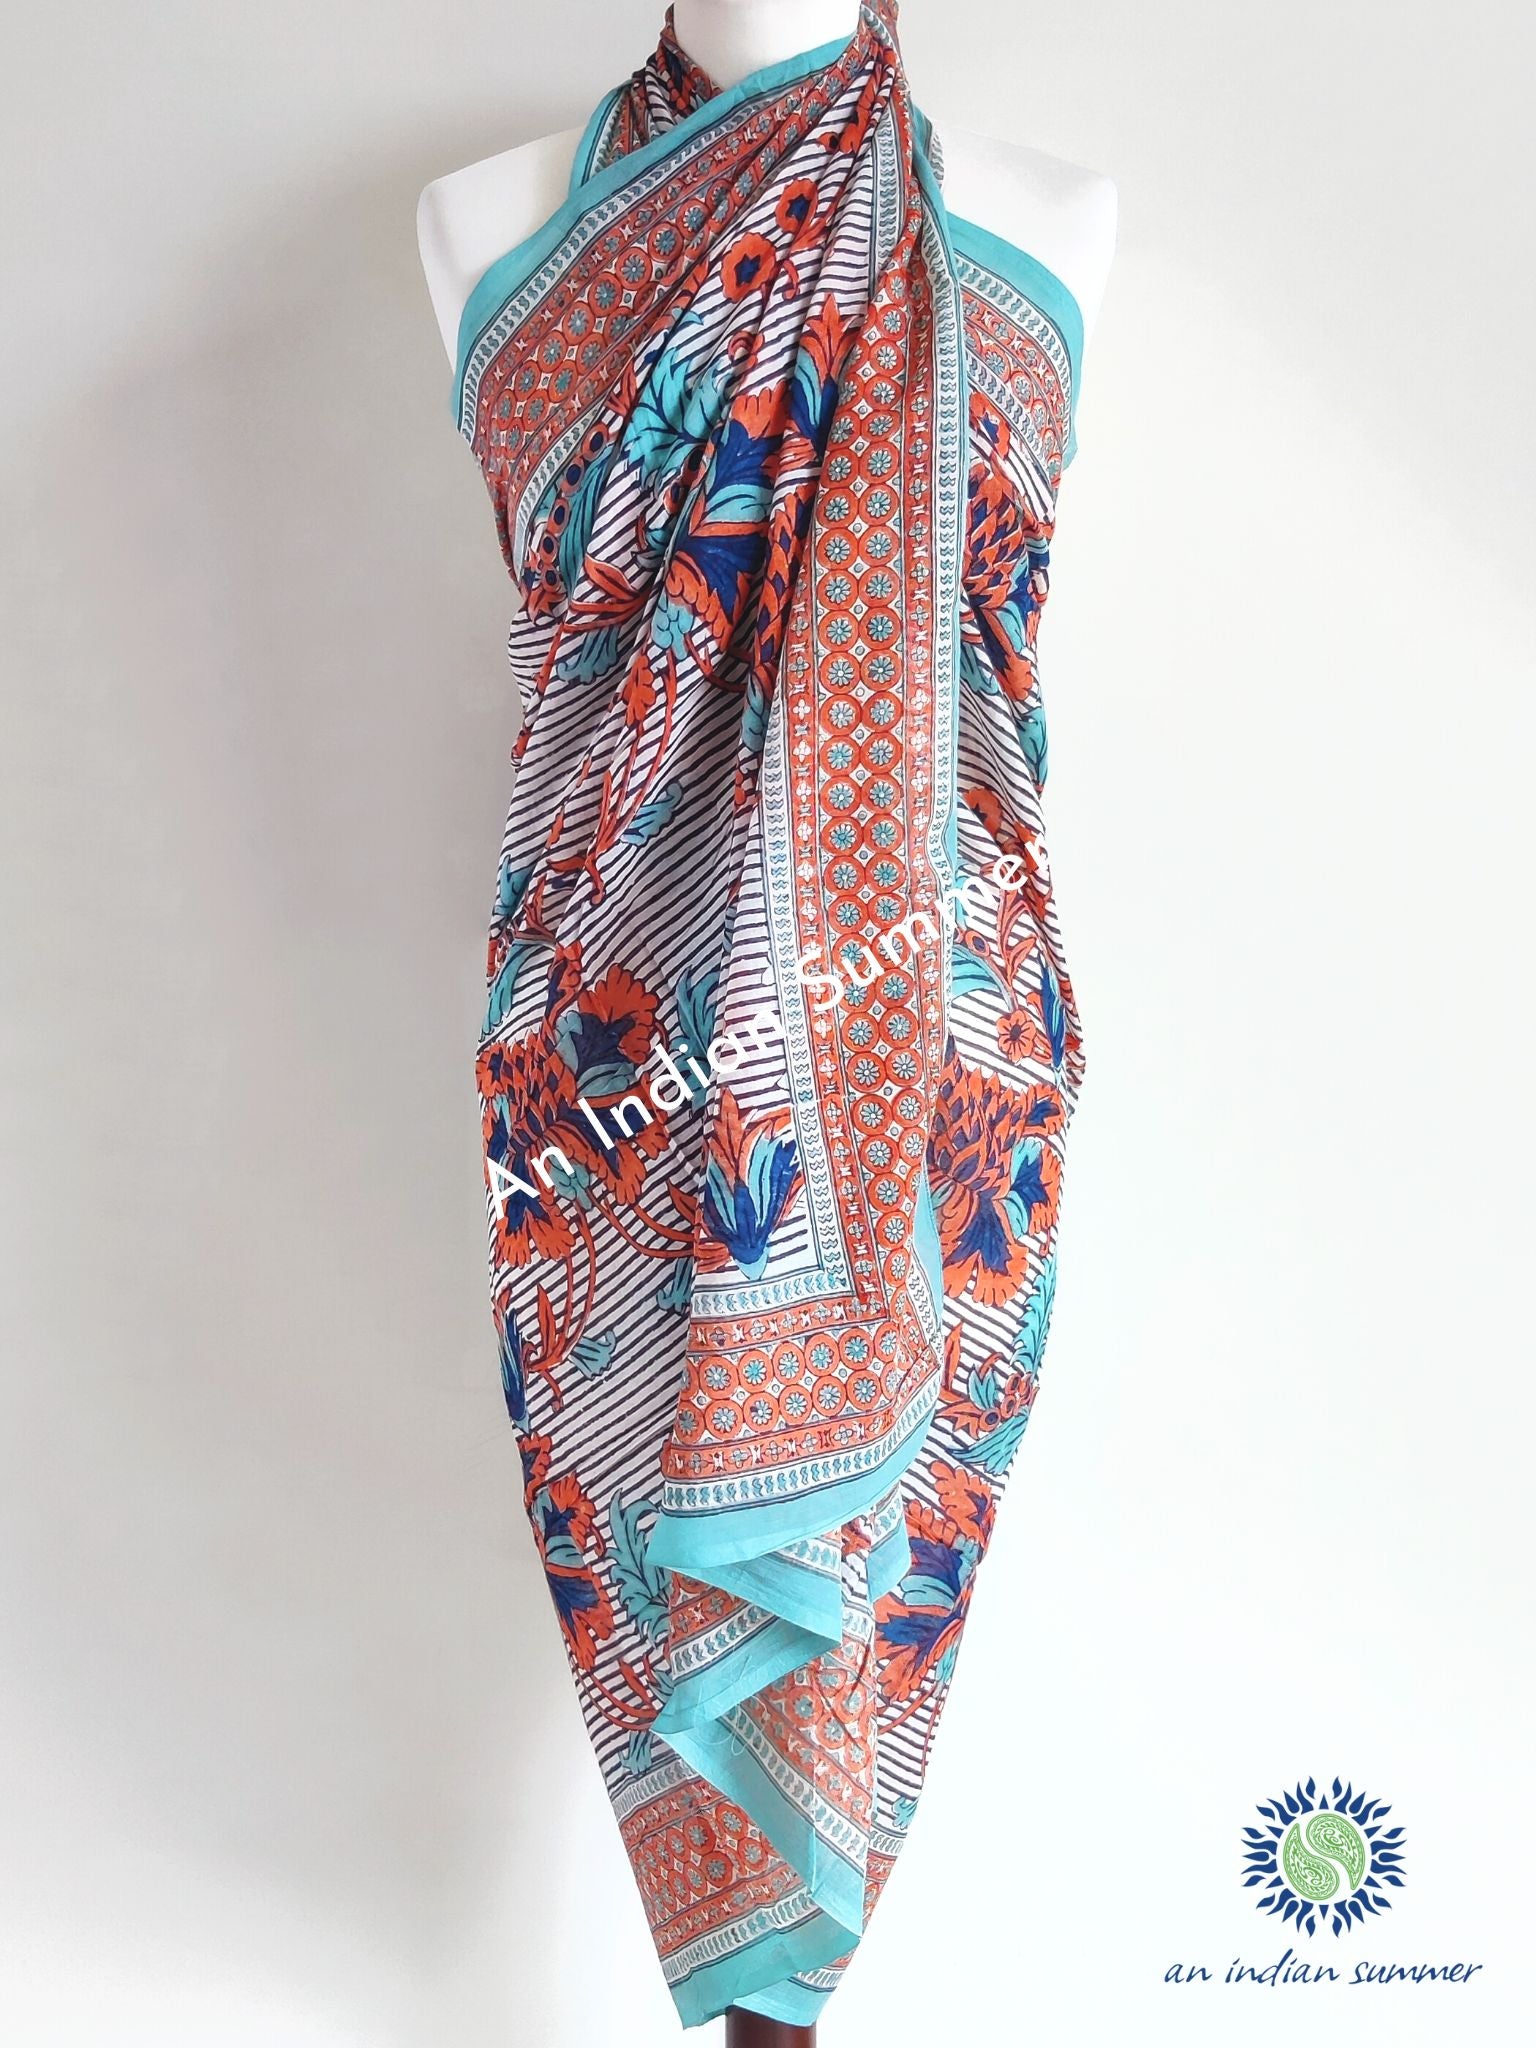 Seville Sarong Pareo | Blue & Orange Floral & Stripe Print | Hand Block Printed | Soft Cotton Voile | An Indian Summer | Seasonless Timeless Sustainable Ethical Authentic Artisan Conscious Clothing Lifestyle Brand